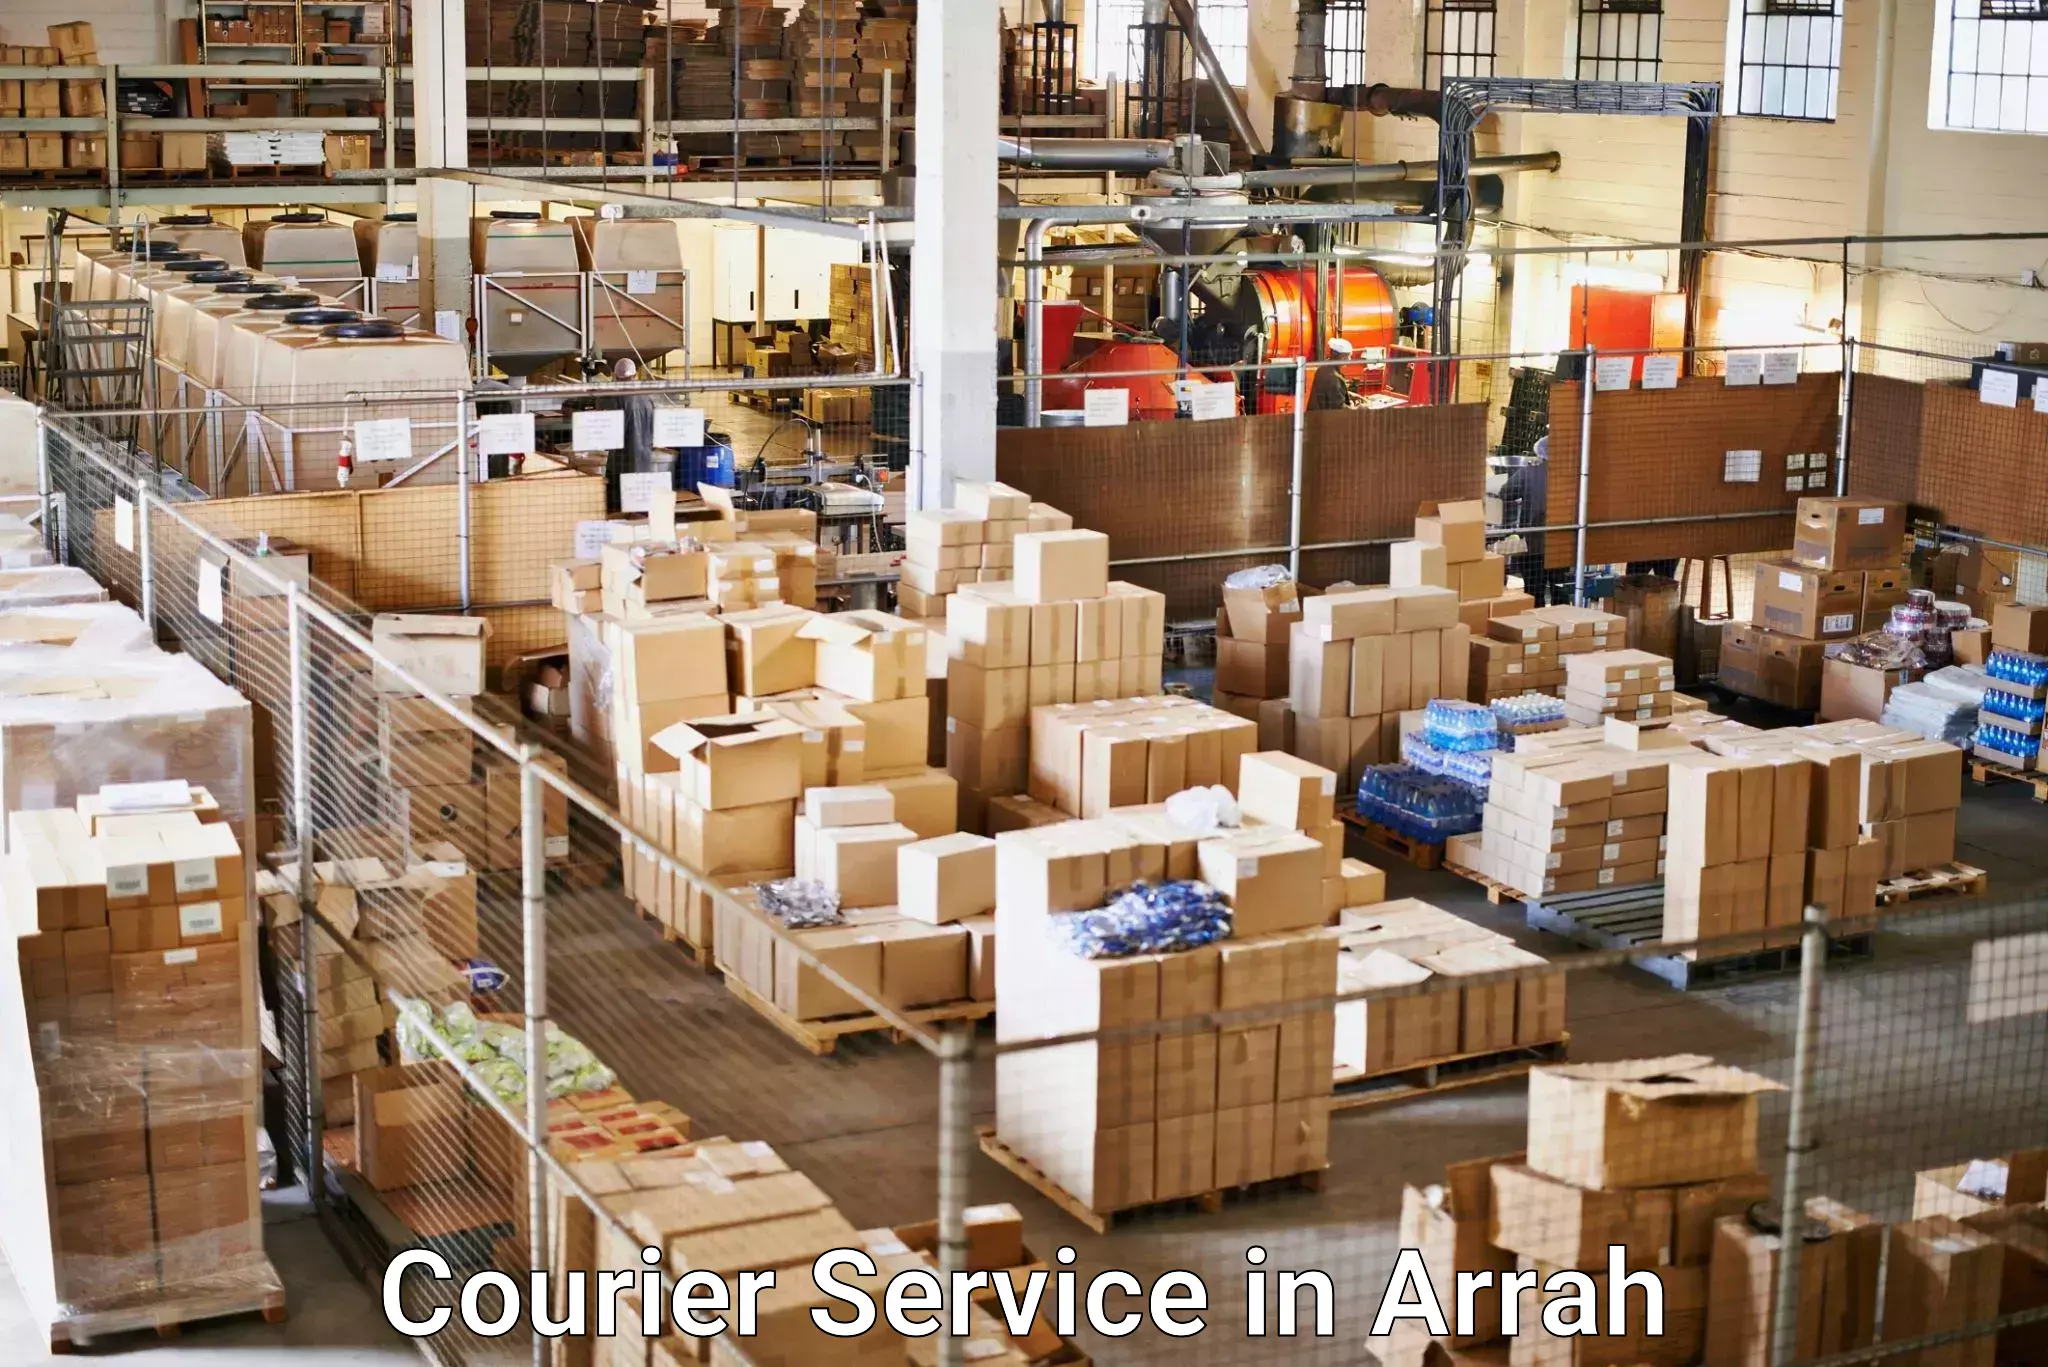 Budget-friendly shipping in Arrah